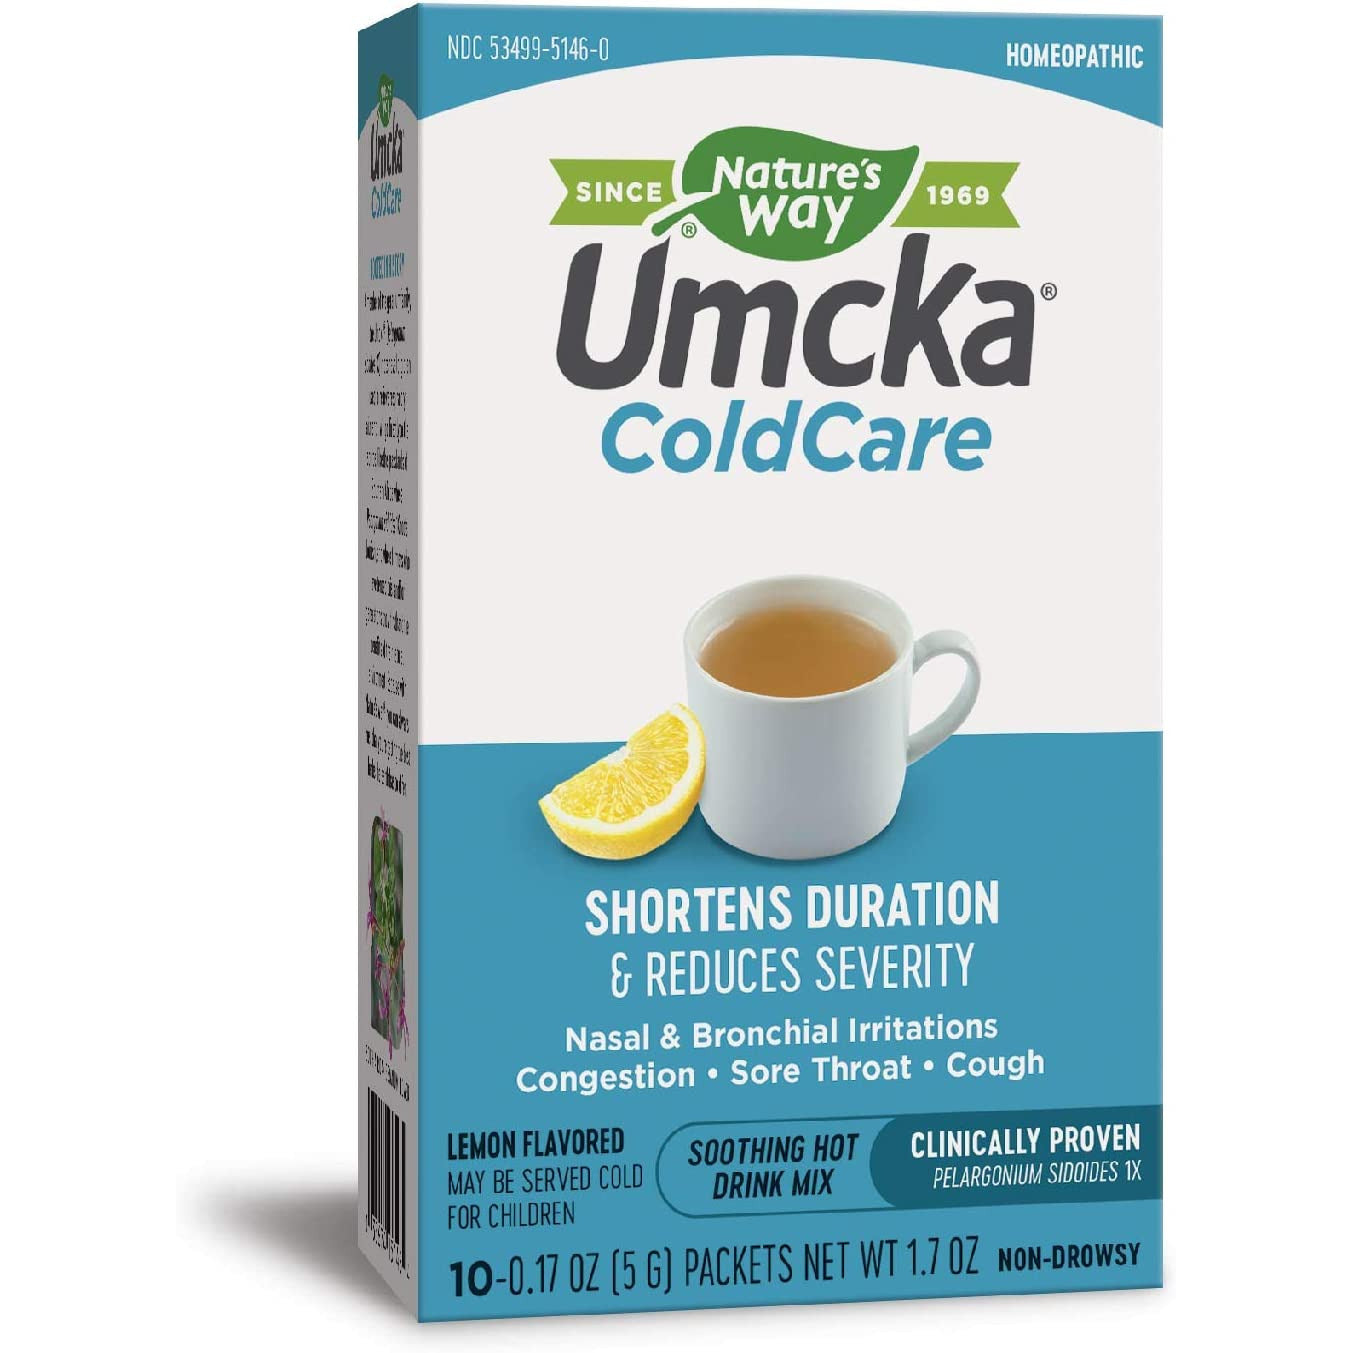 Nature's Way Umcka ColdCare Soothing Hot Drink Mix